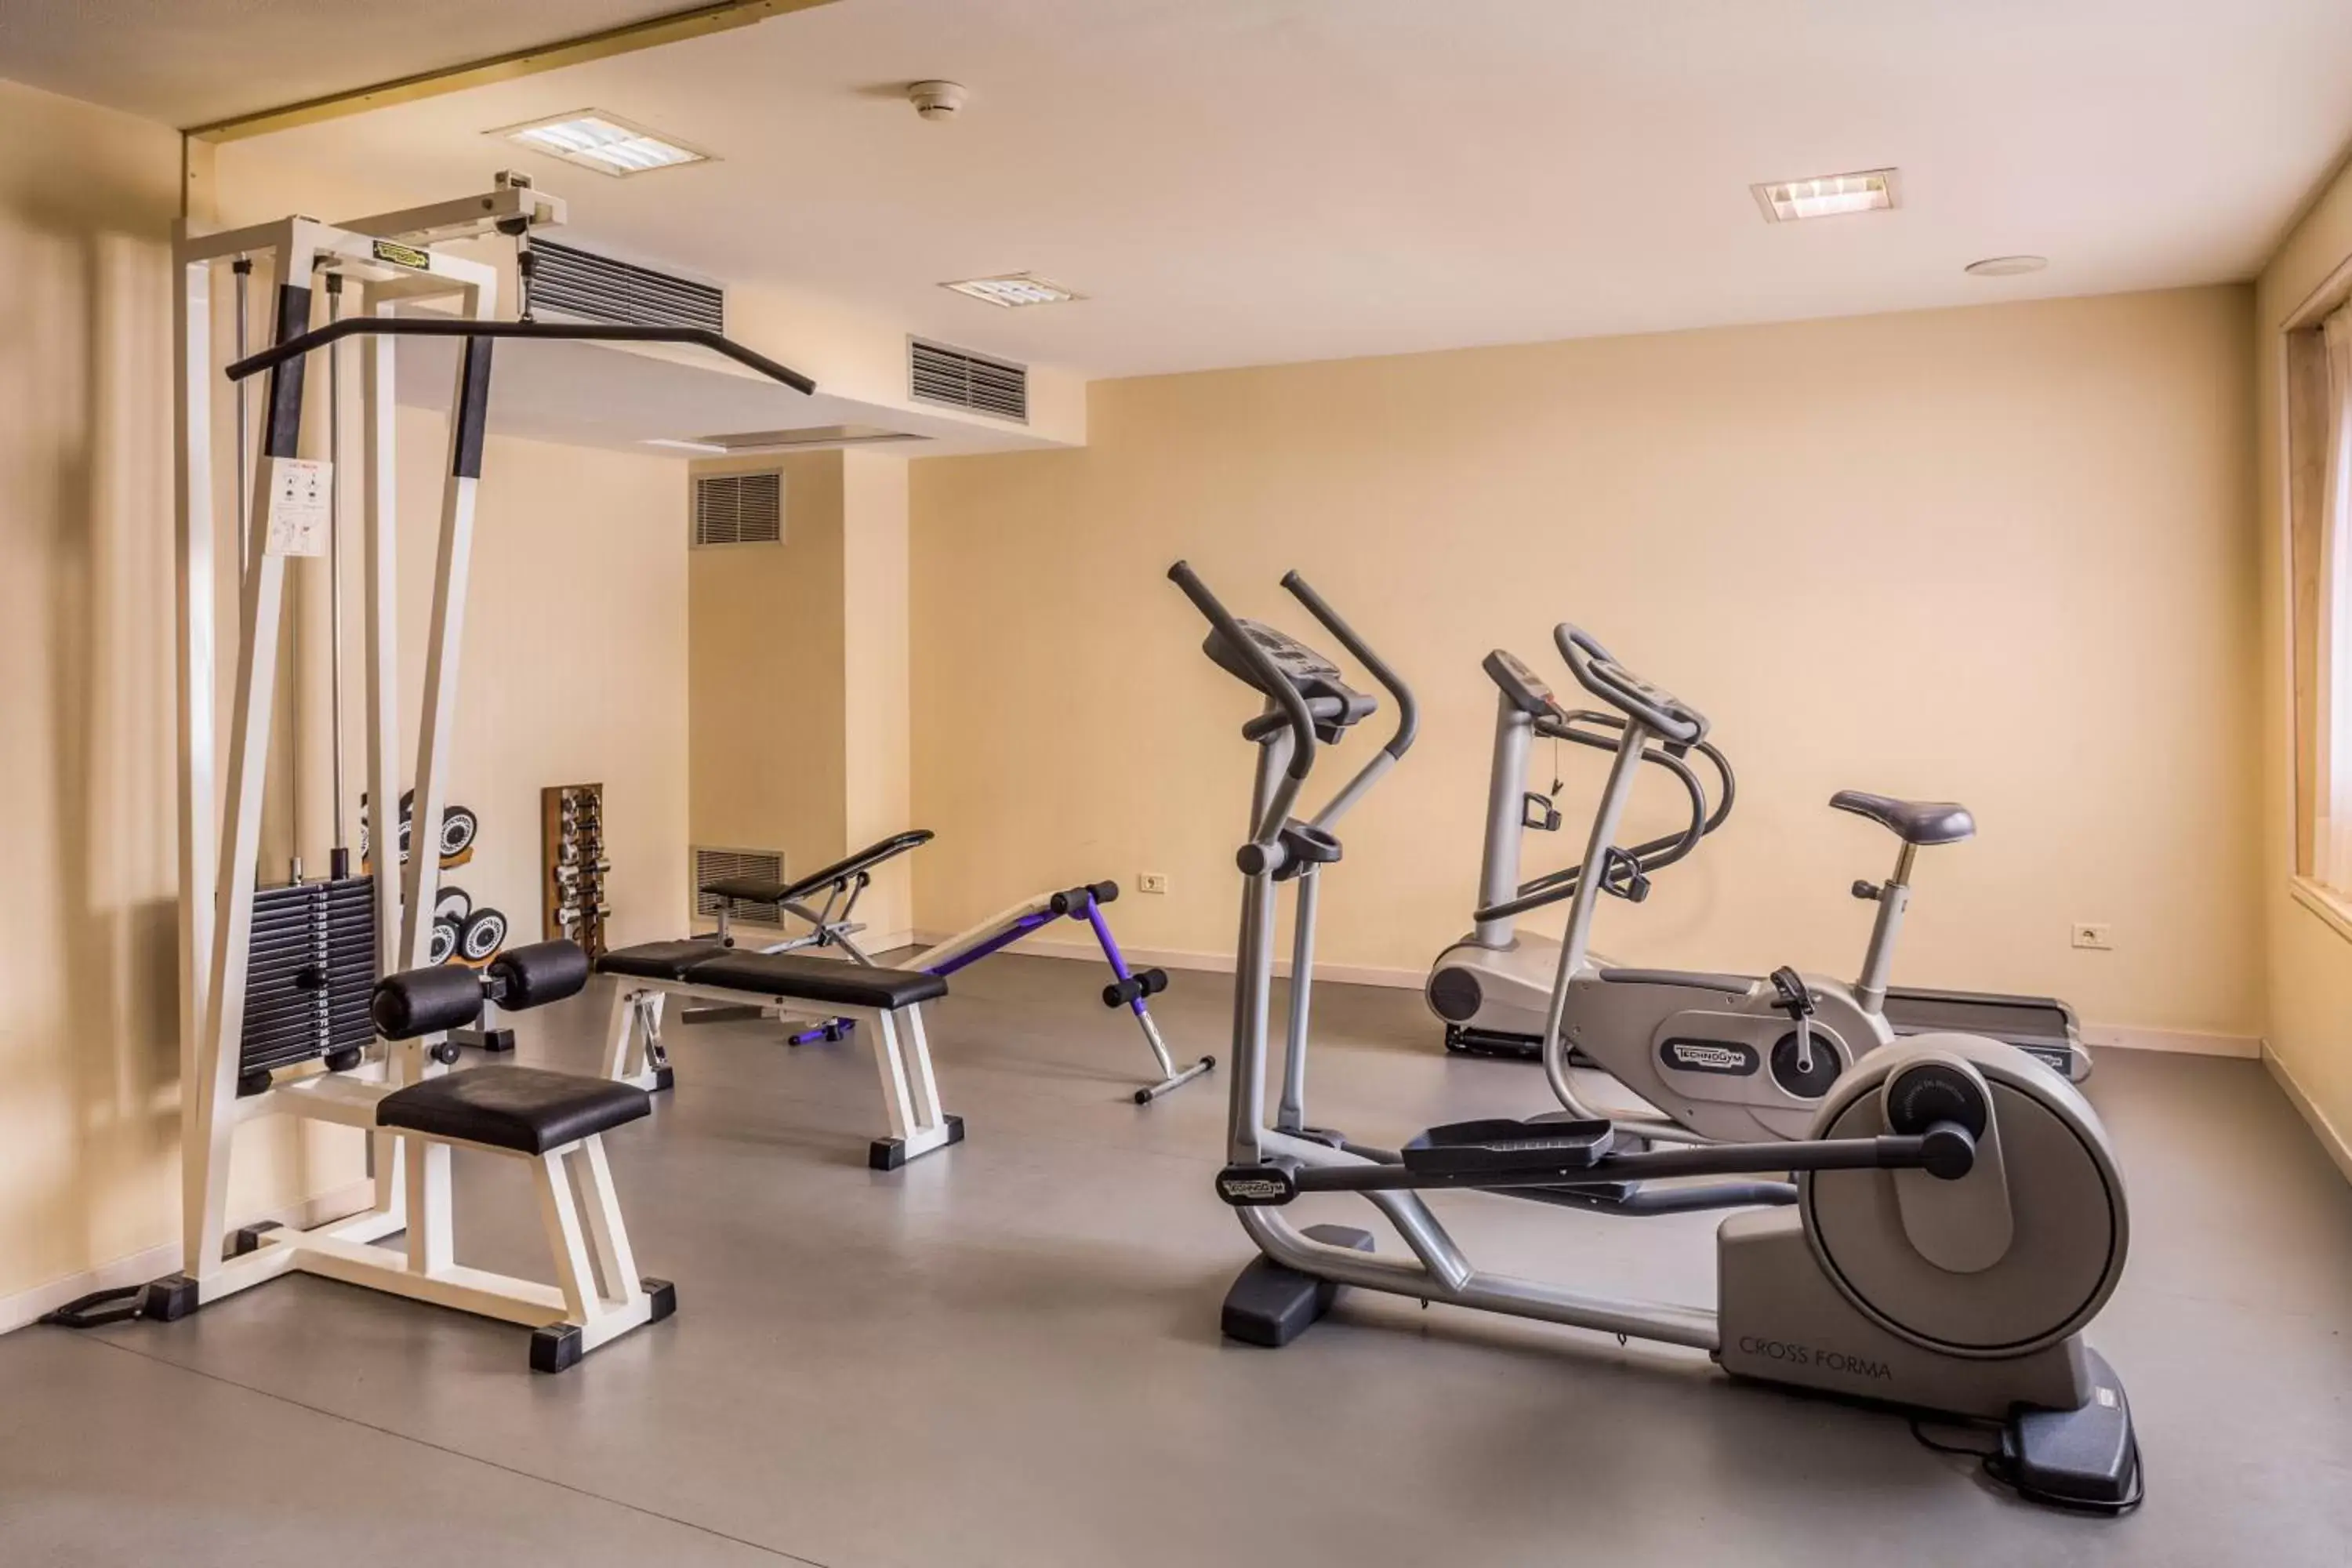 Fitness centre/facilities in Exe Boston